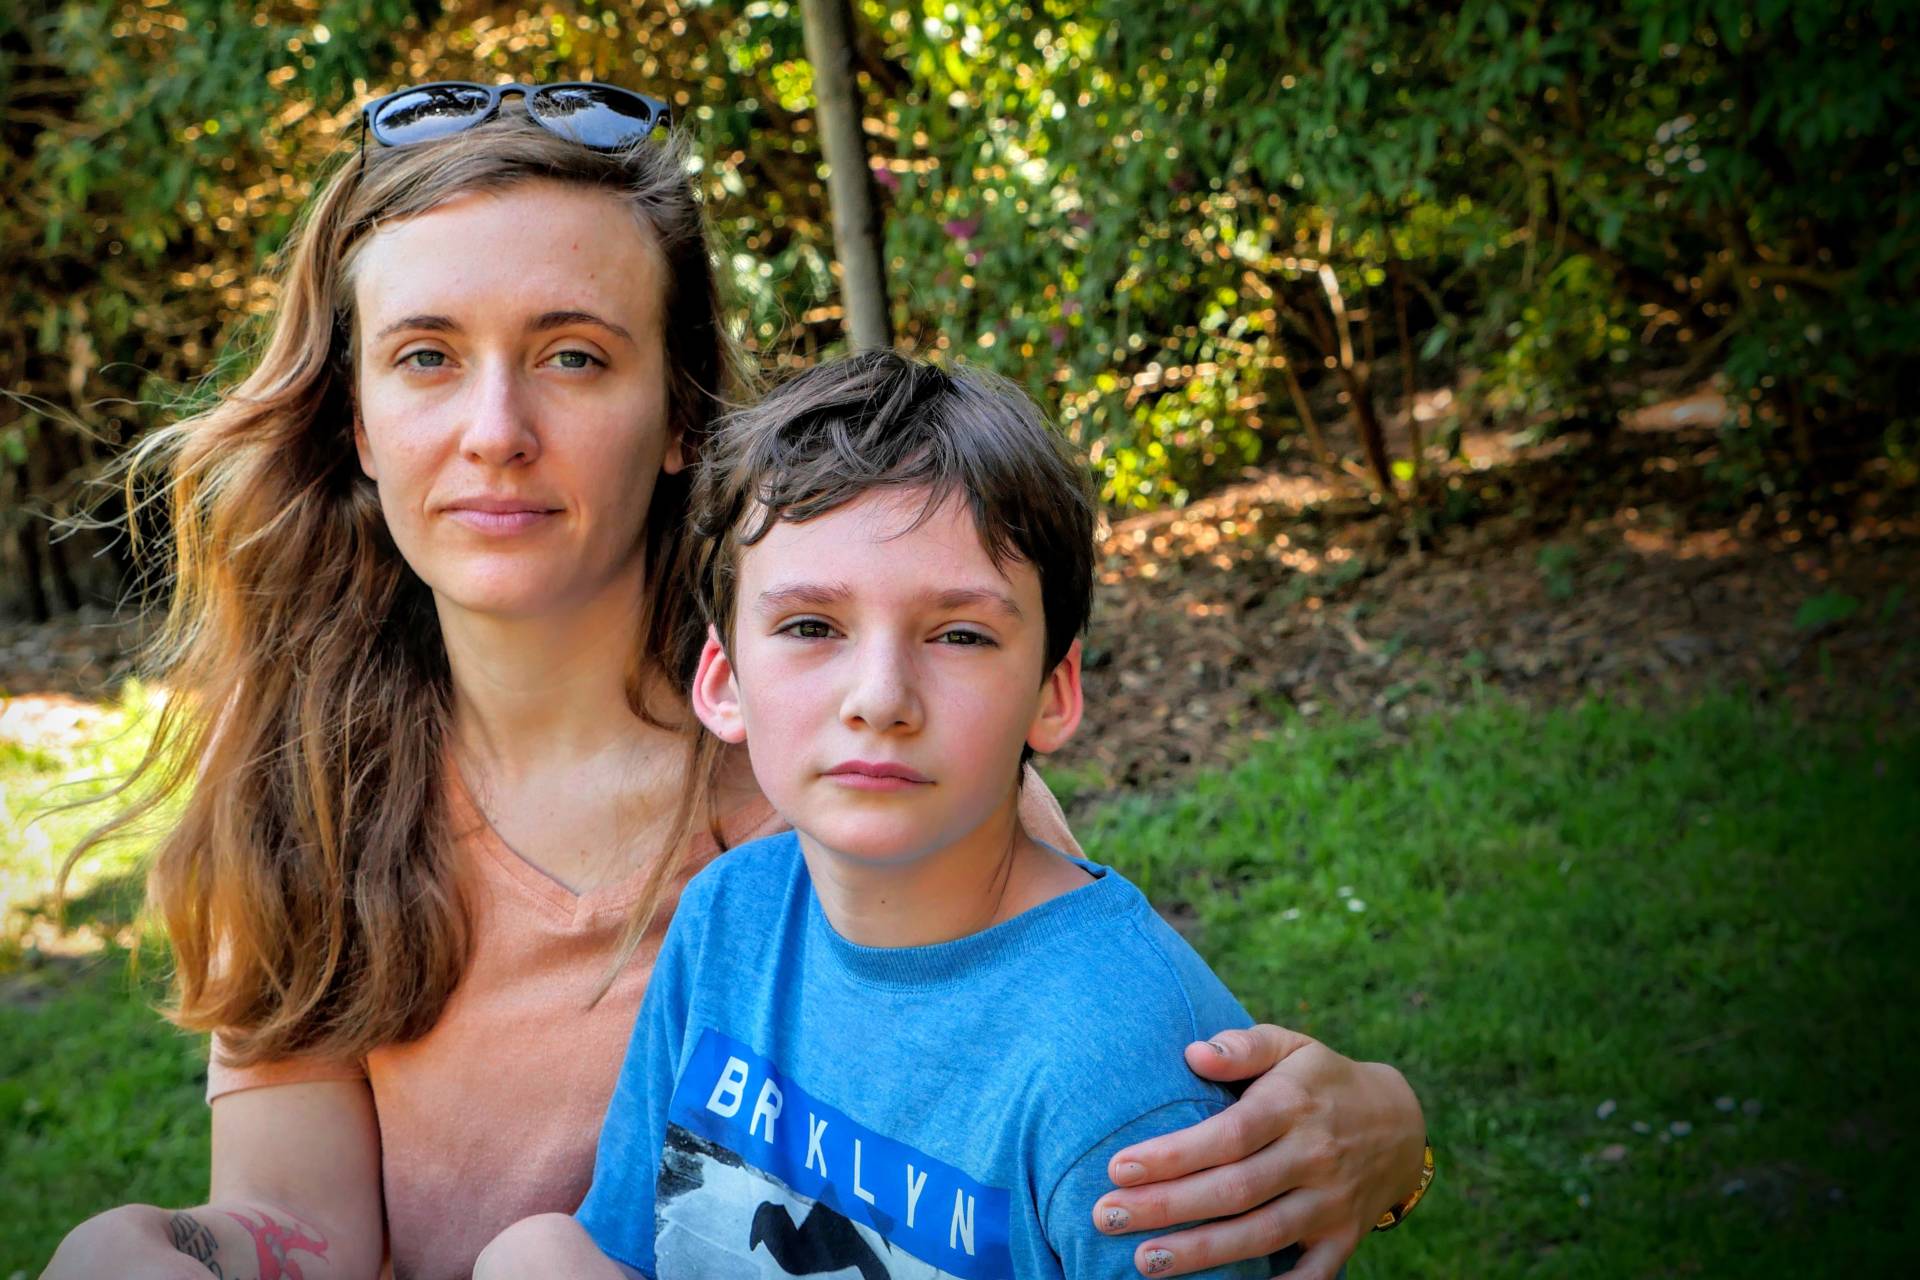 Natalie Dunnege and her son, Strazh.